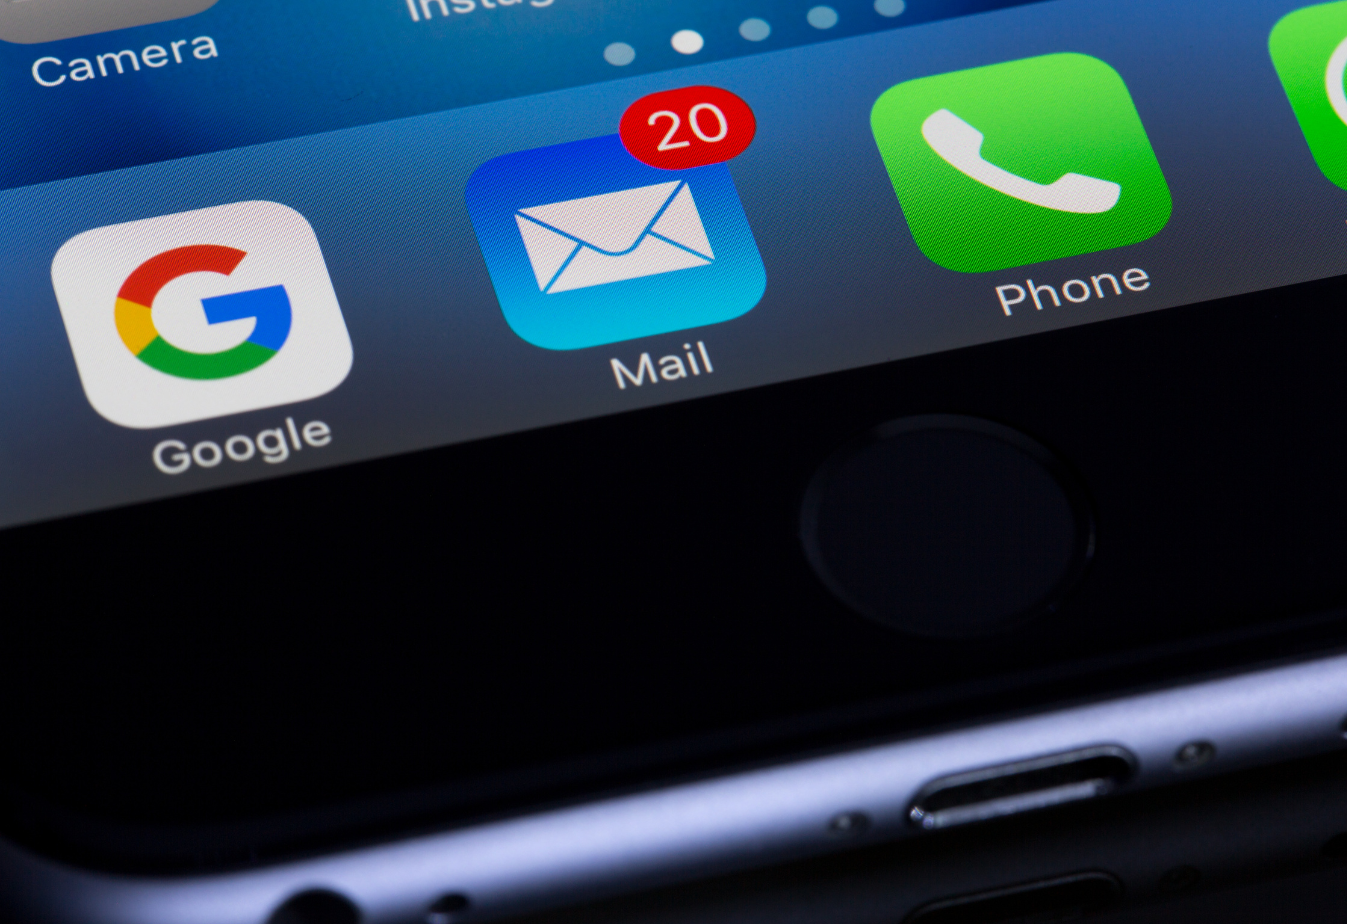 phone screen with the google app, mail app with 20 notifications and the phone app from left to right